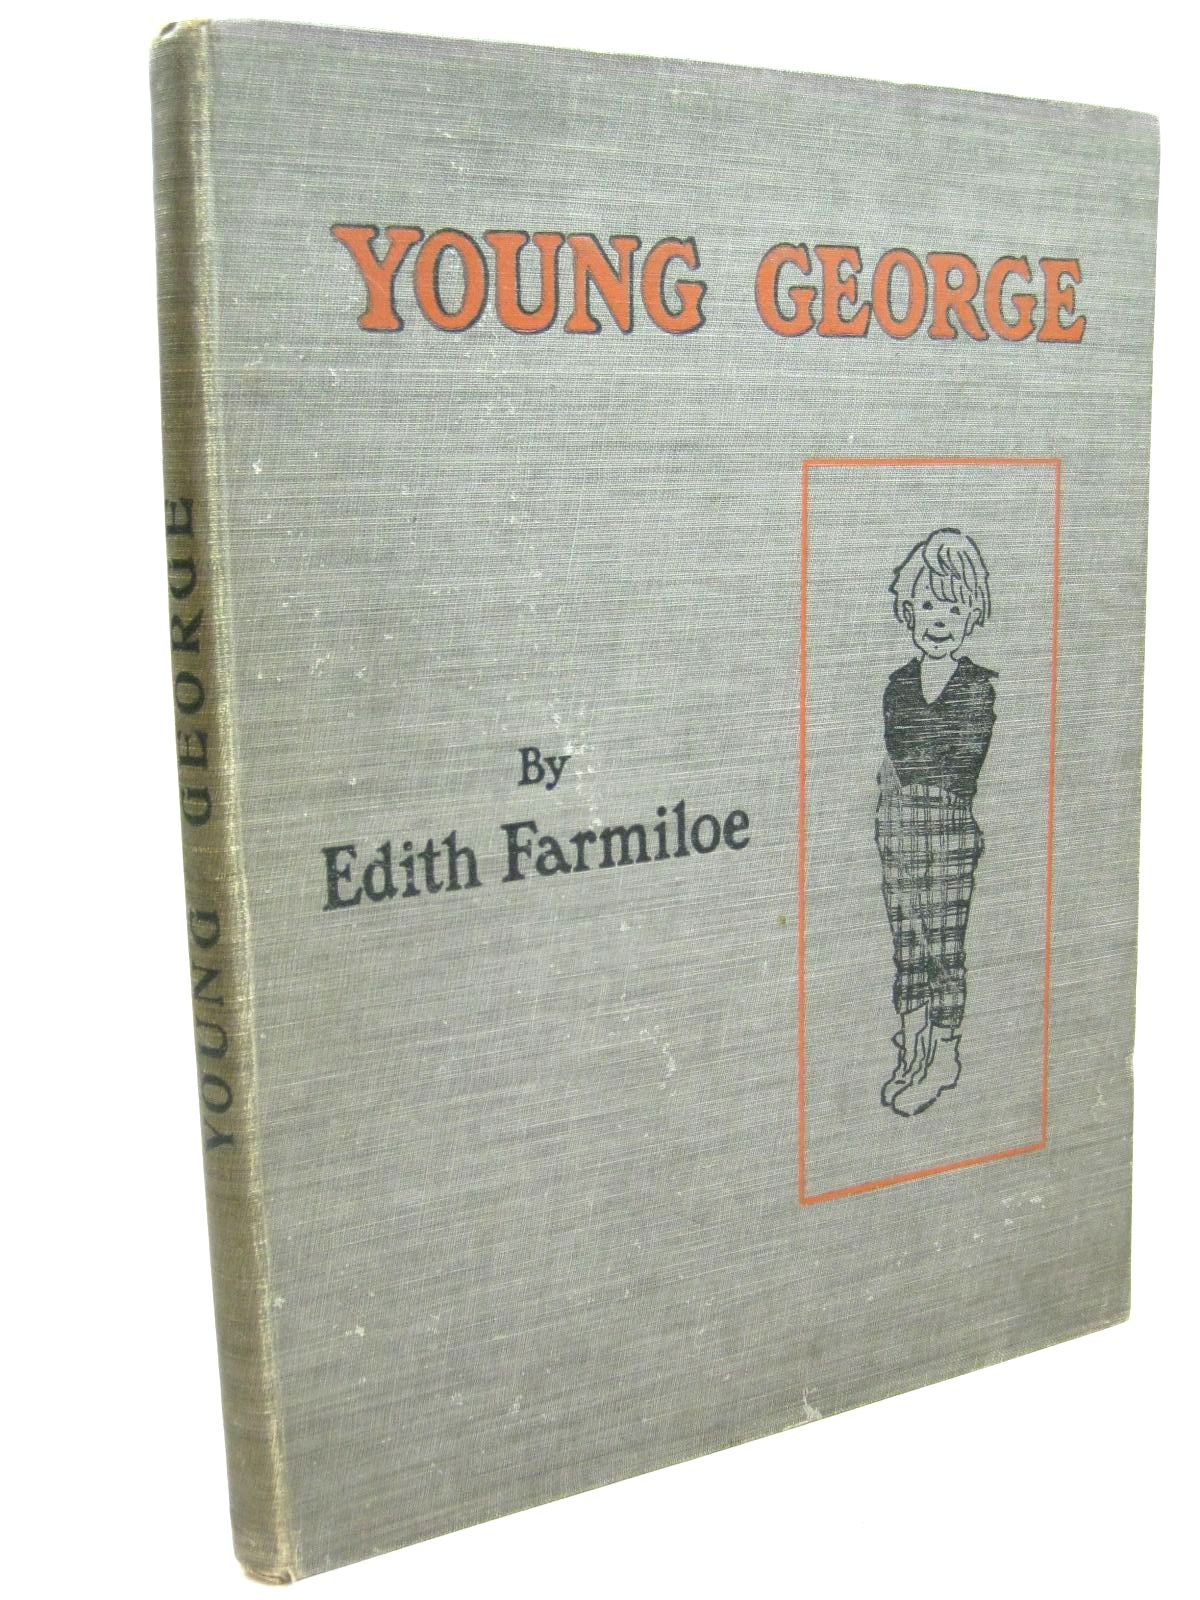 Photo of YOUNG GEORGE - HIS LIFE written by Farmiloe, Edith illustrated by Farmiloe, Edith published by William Heinemann (STOCK CODE: 1506163)  for sale by Stella & Rose's Books